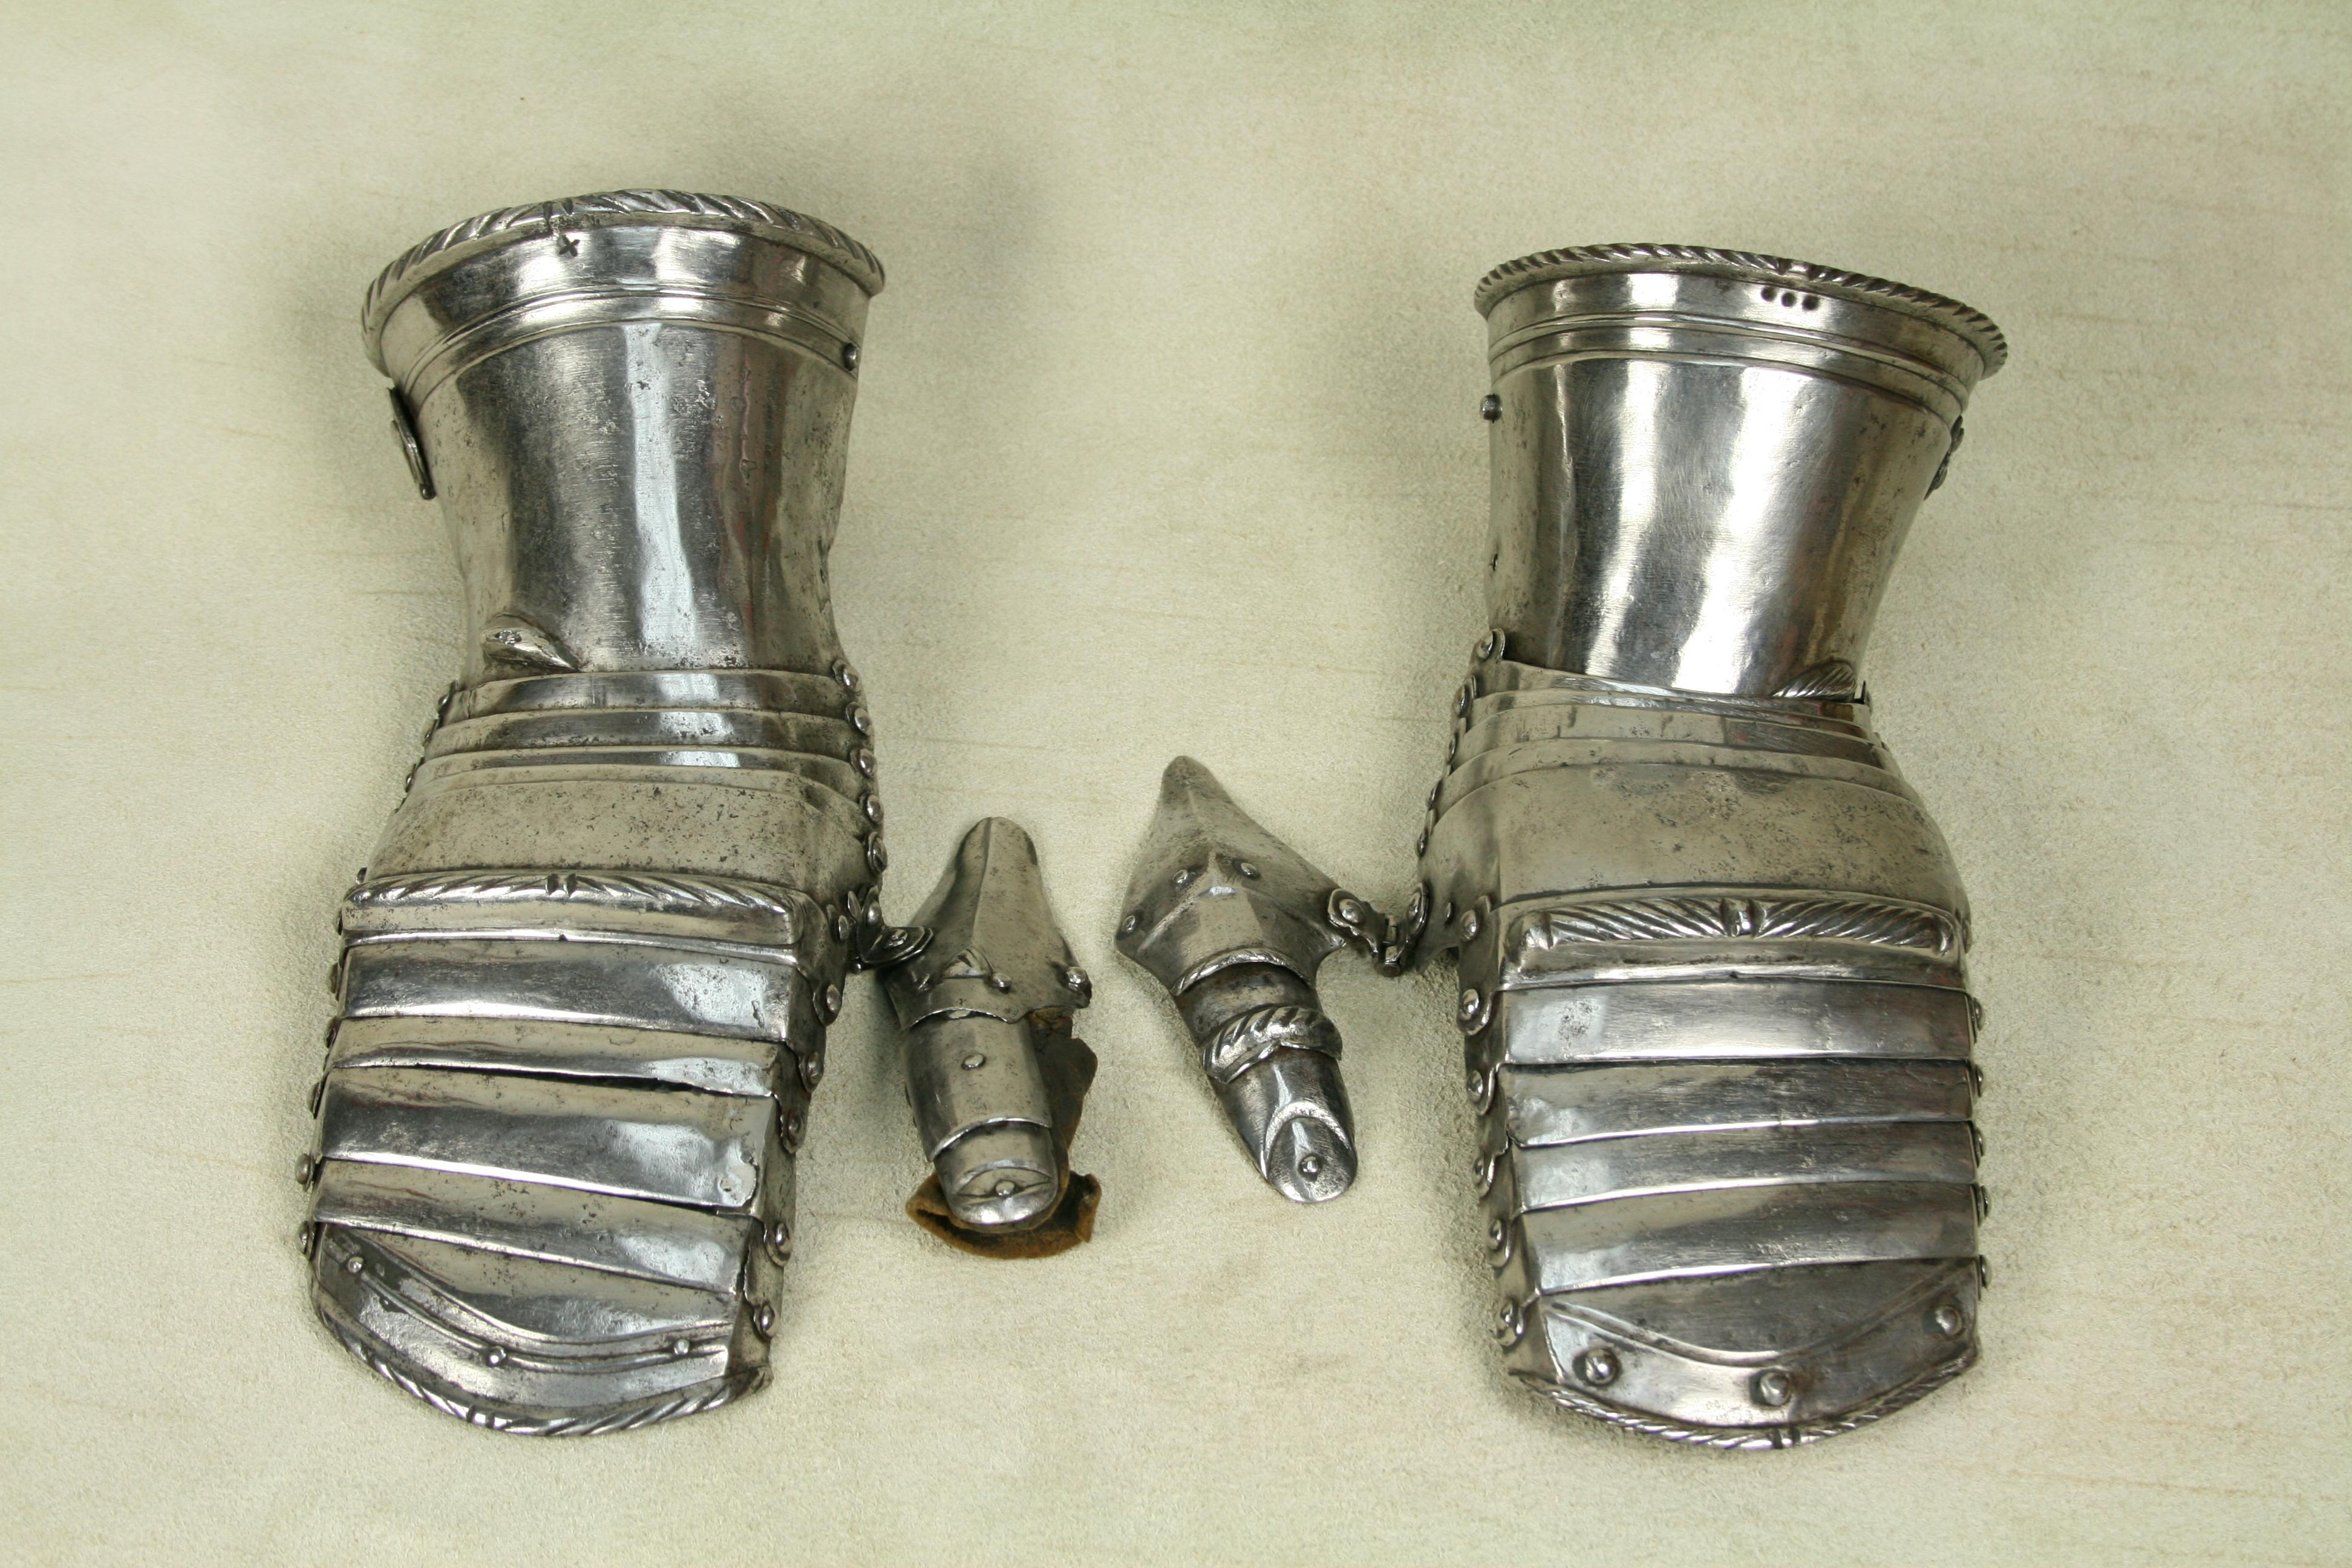 2 Gauntlets - A-104-pair-new-back